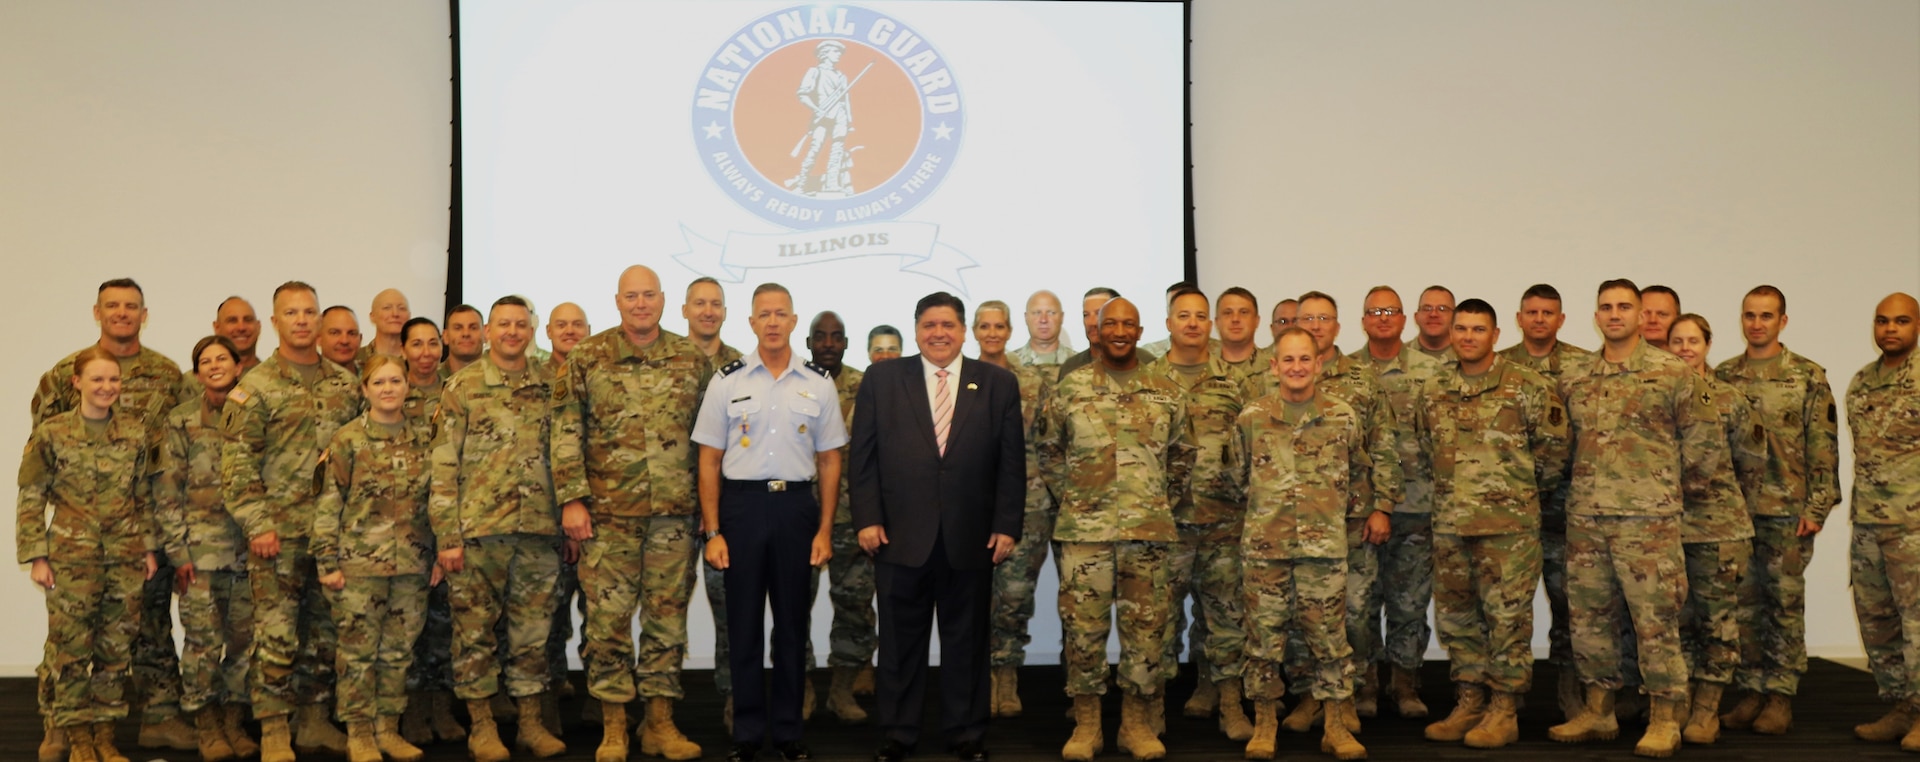 Illinois Governor JB Pritzker, Maj. Gen. Rich Neely, the Adjutant General of Illinois and the Commander of the Illinois National Guard, and participants in the Illinois National Guard's quarterly Senior Leader Engagement pose for a group photo.